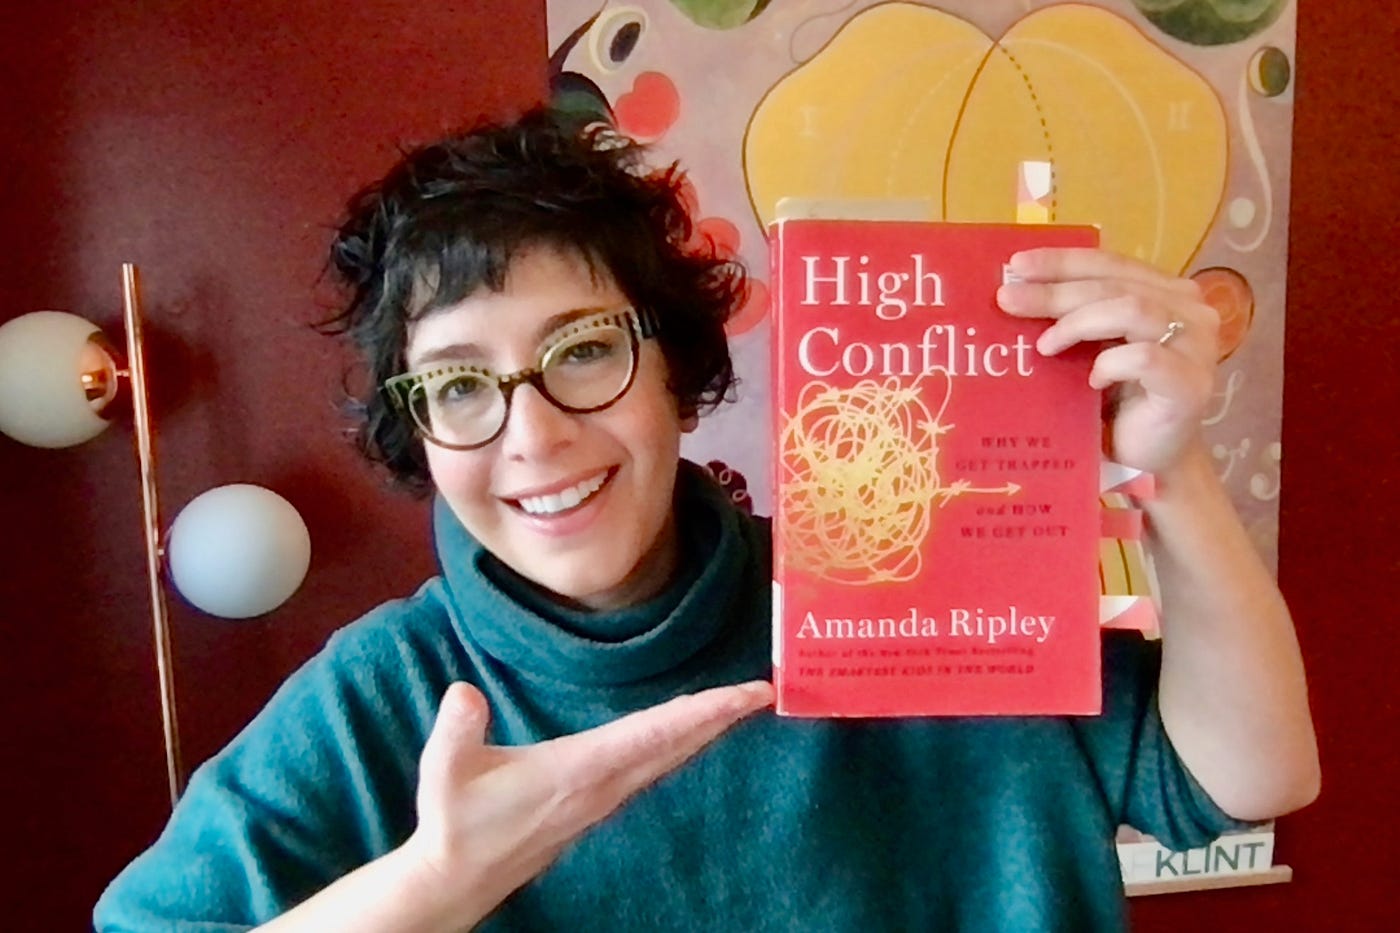 Lessons for Journalists from Amanda Ripley's Book, High Conflict